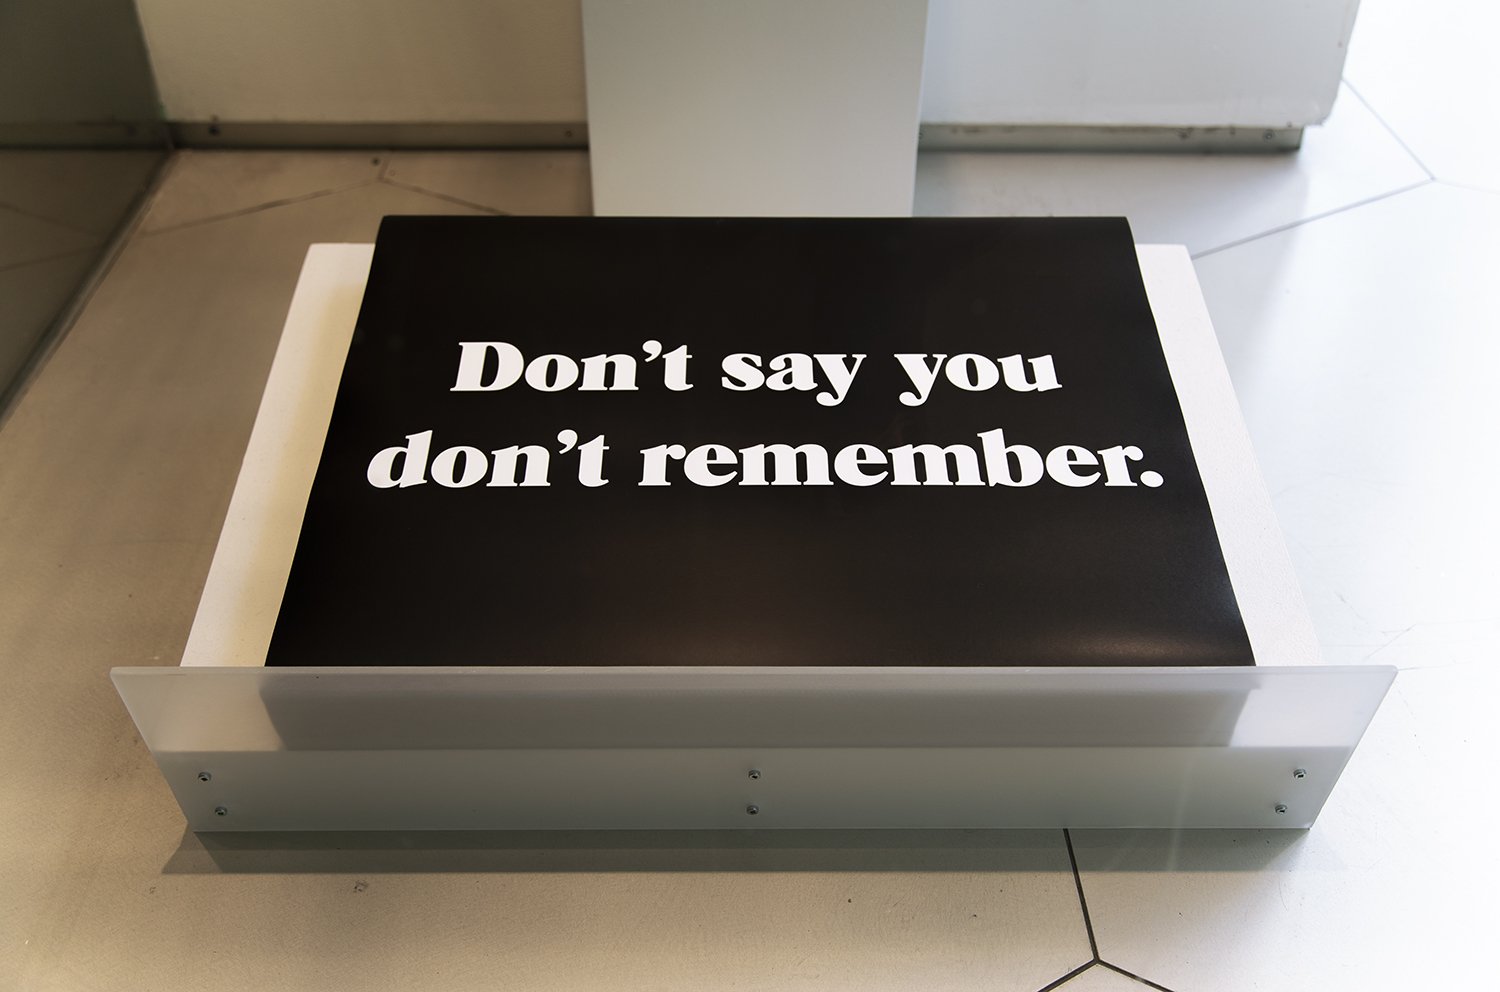   Rec-elections (Don’t say you don’t remember.),  2019 poster 18 x 24 inches Installation view,  The Historical Present , The New School, NY, NY 